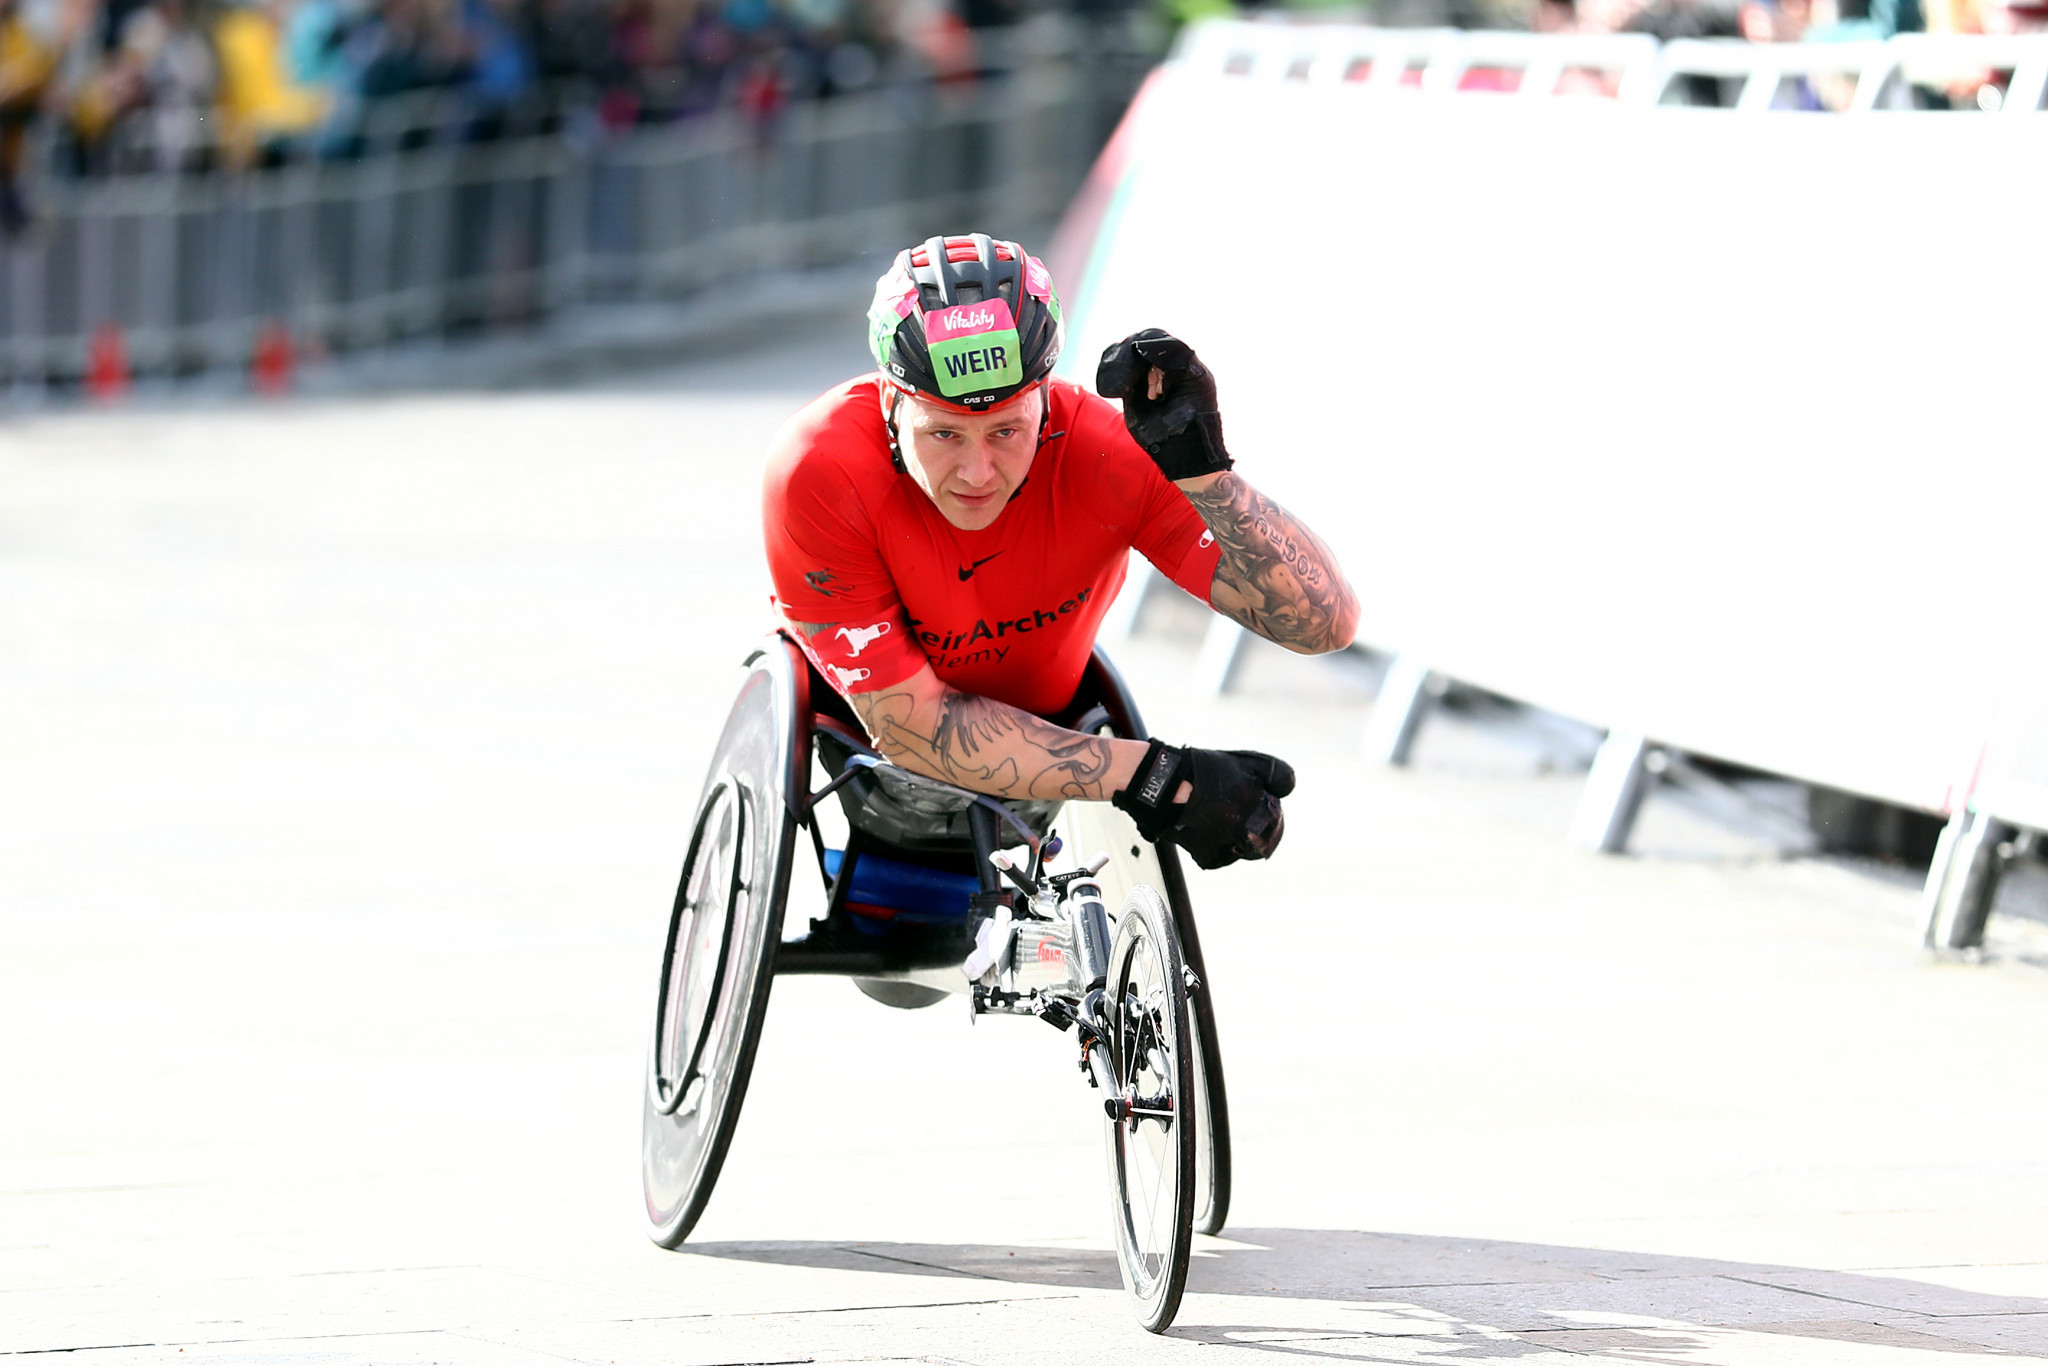 David Weir will compete for the 20th time at the London Marathon on Sunday ©Getty Images